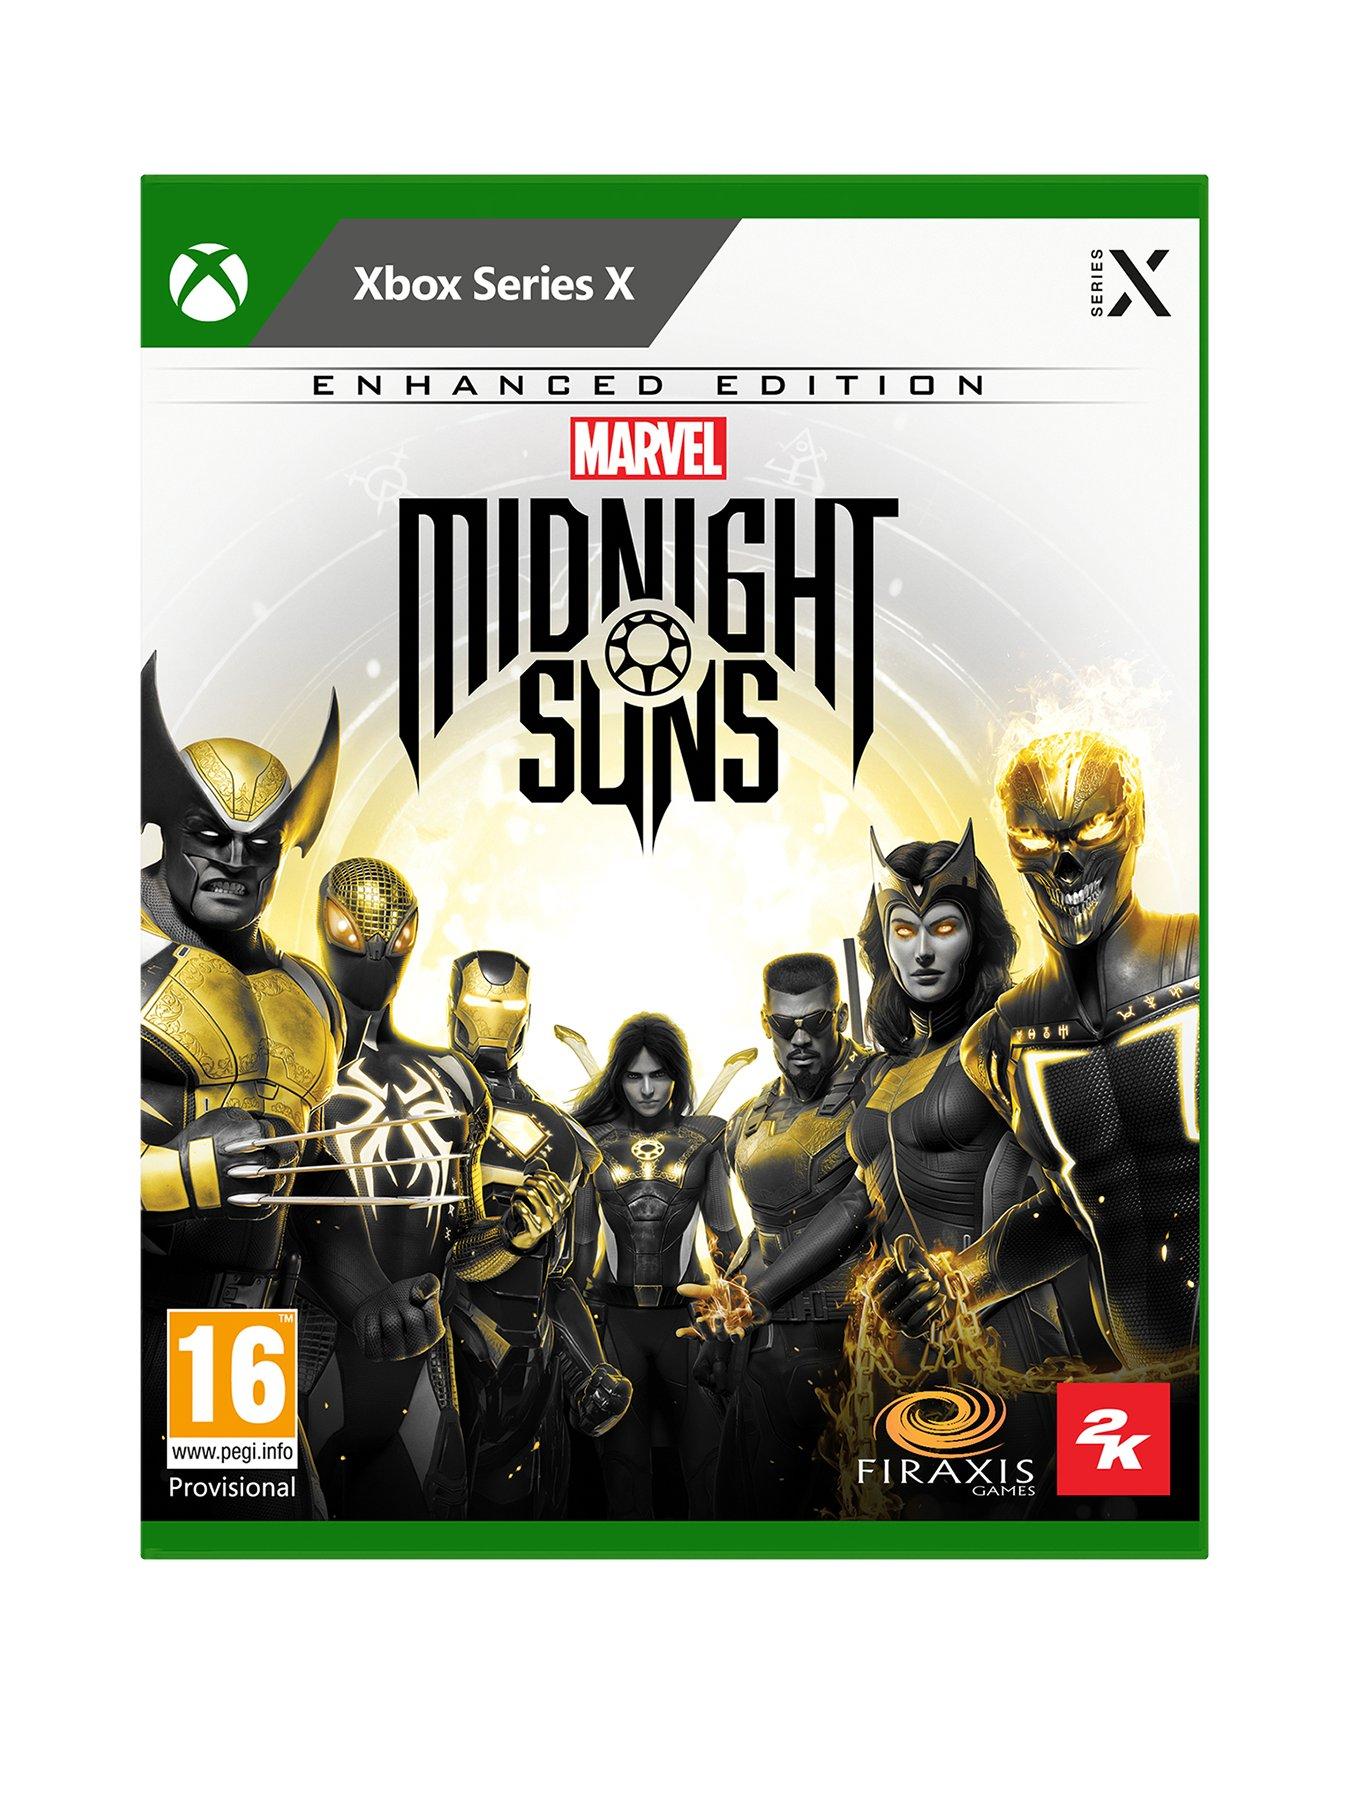 Marvel's Midnight Suns review – Friendship triumphs over evil